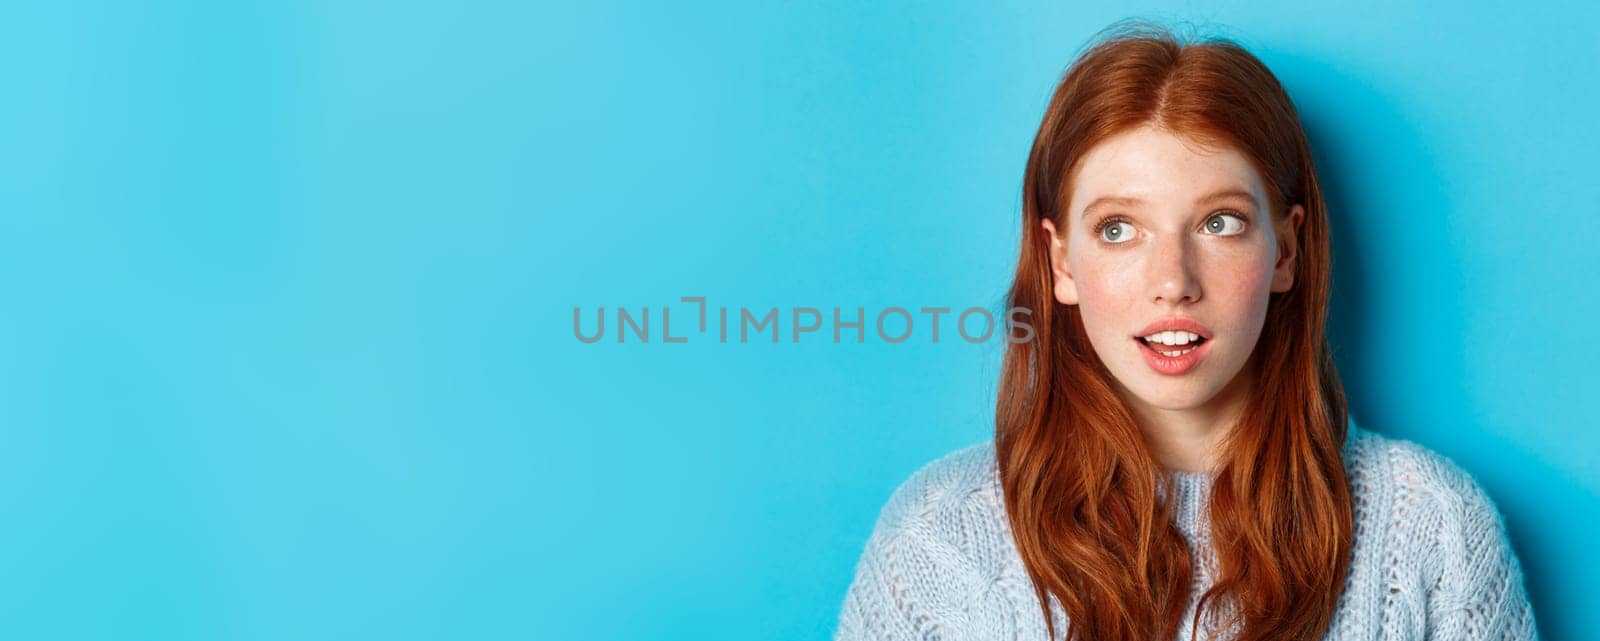 Headshot of thoughtful redhead teen girl looking at upper left corner, staring at logo with curious expression, standing over blue background.